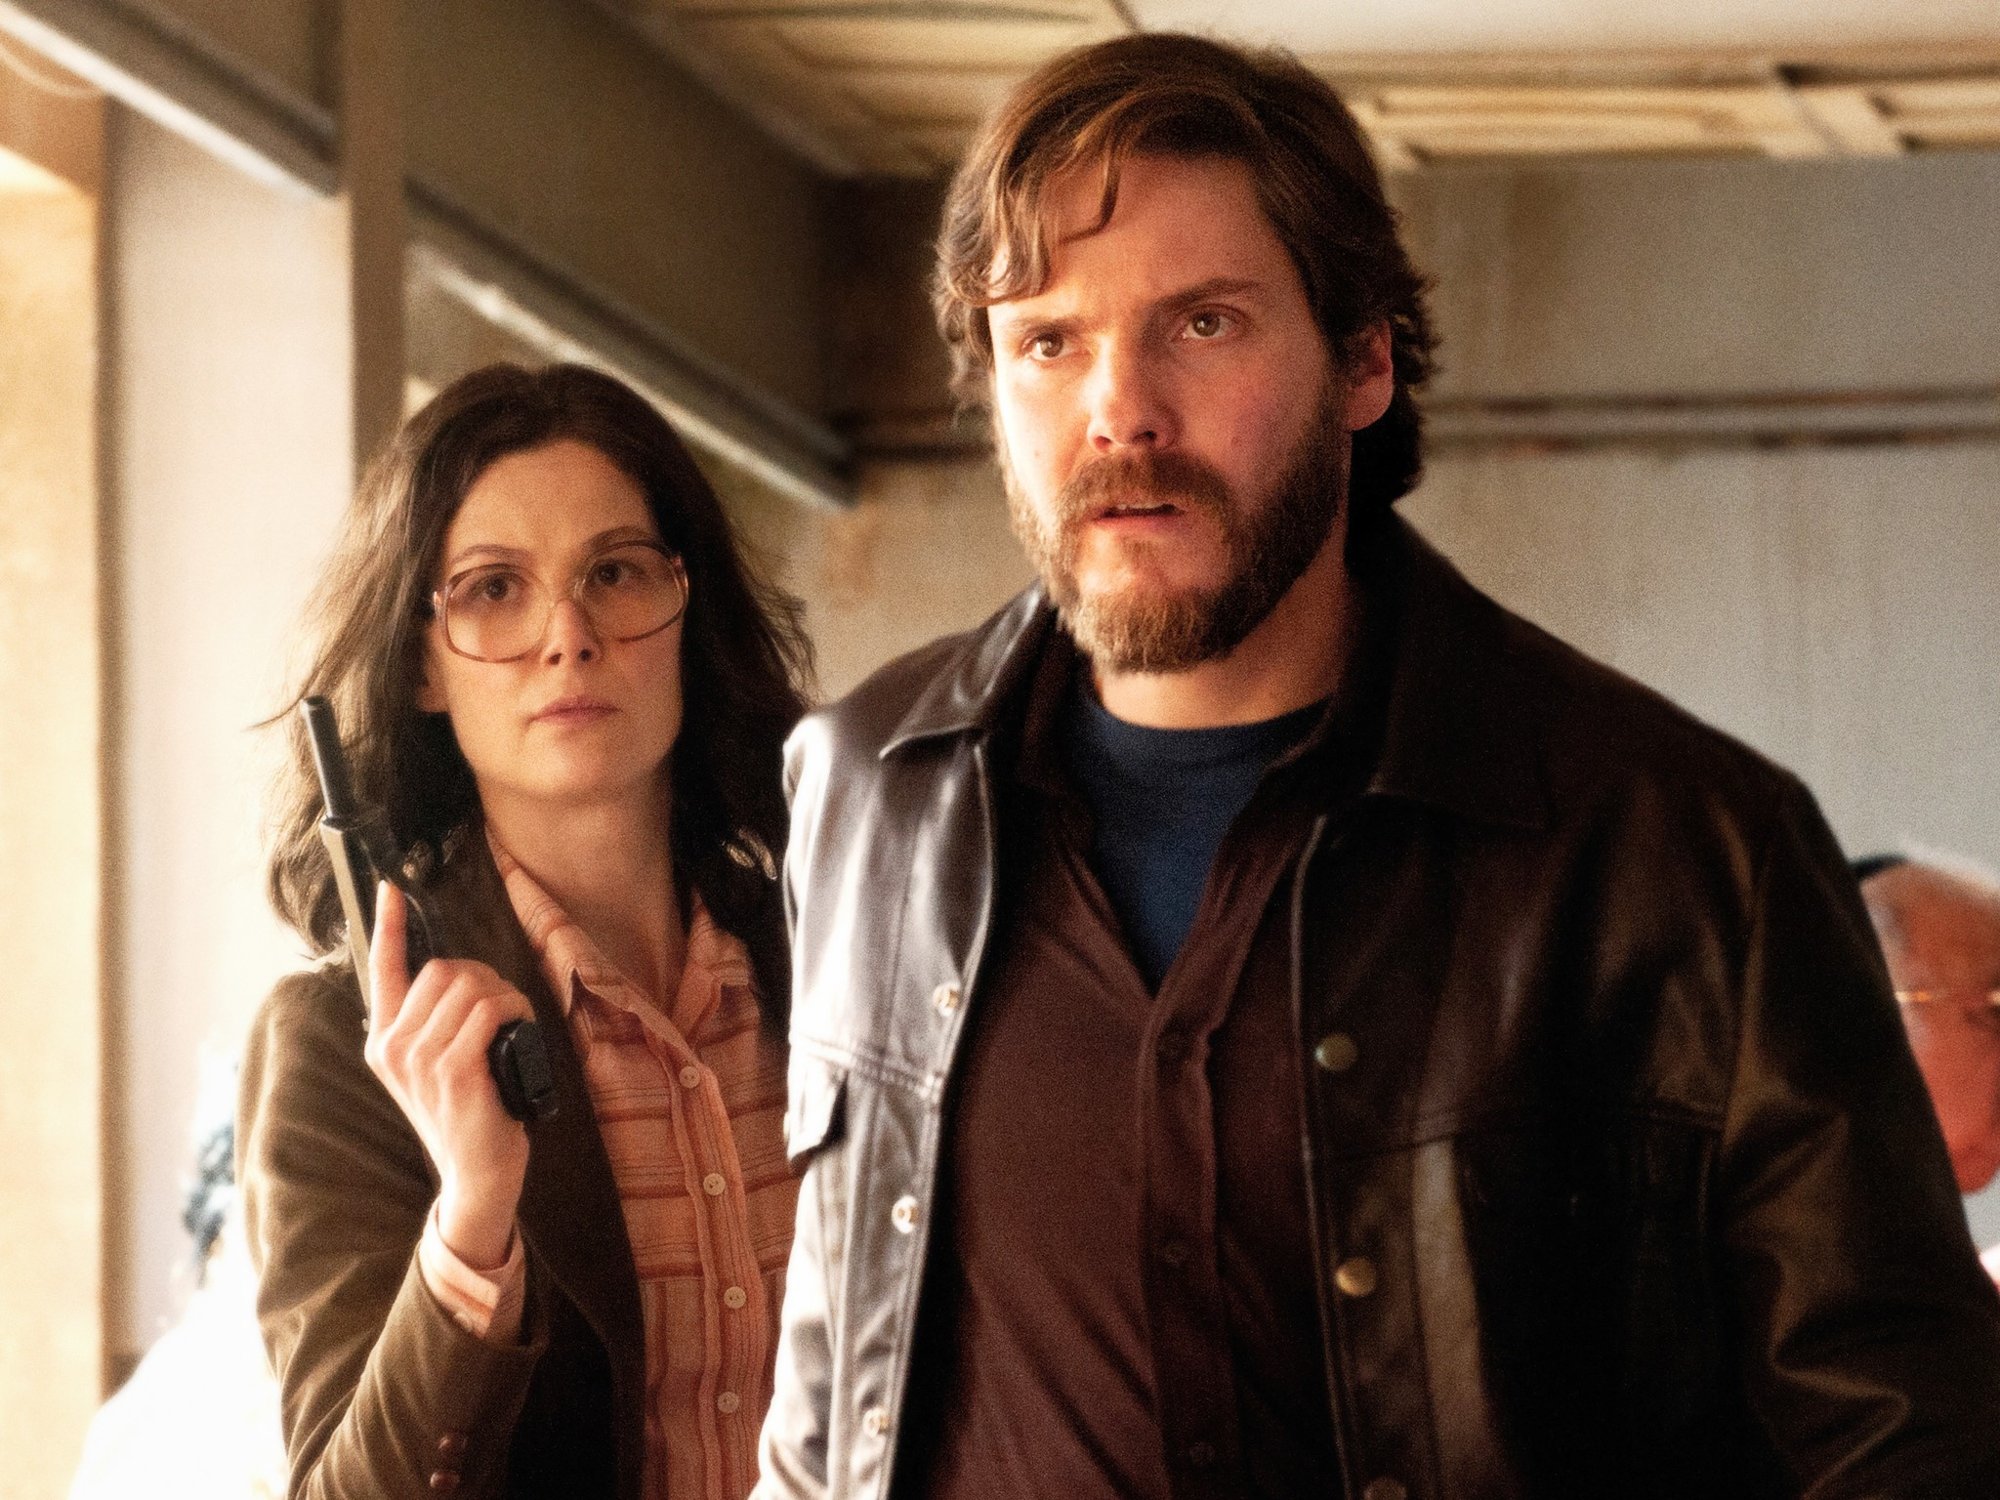 Rosamund Pike stars as Brigitte Kuhlmann and Daniel Bruhl stars as Wilfried Bose in Focus Features' 7 Days in Entebbe (2018)